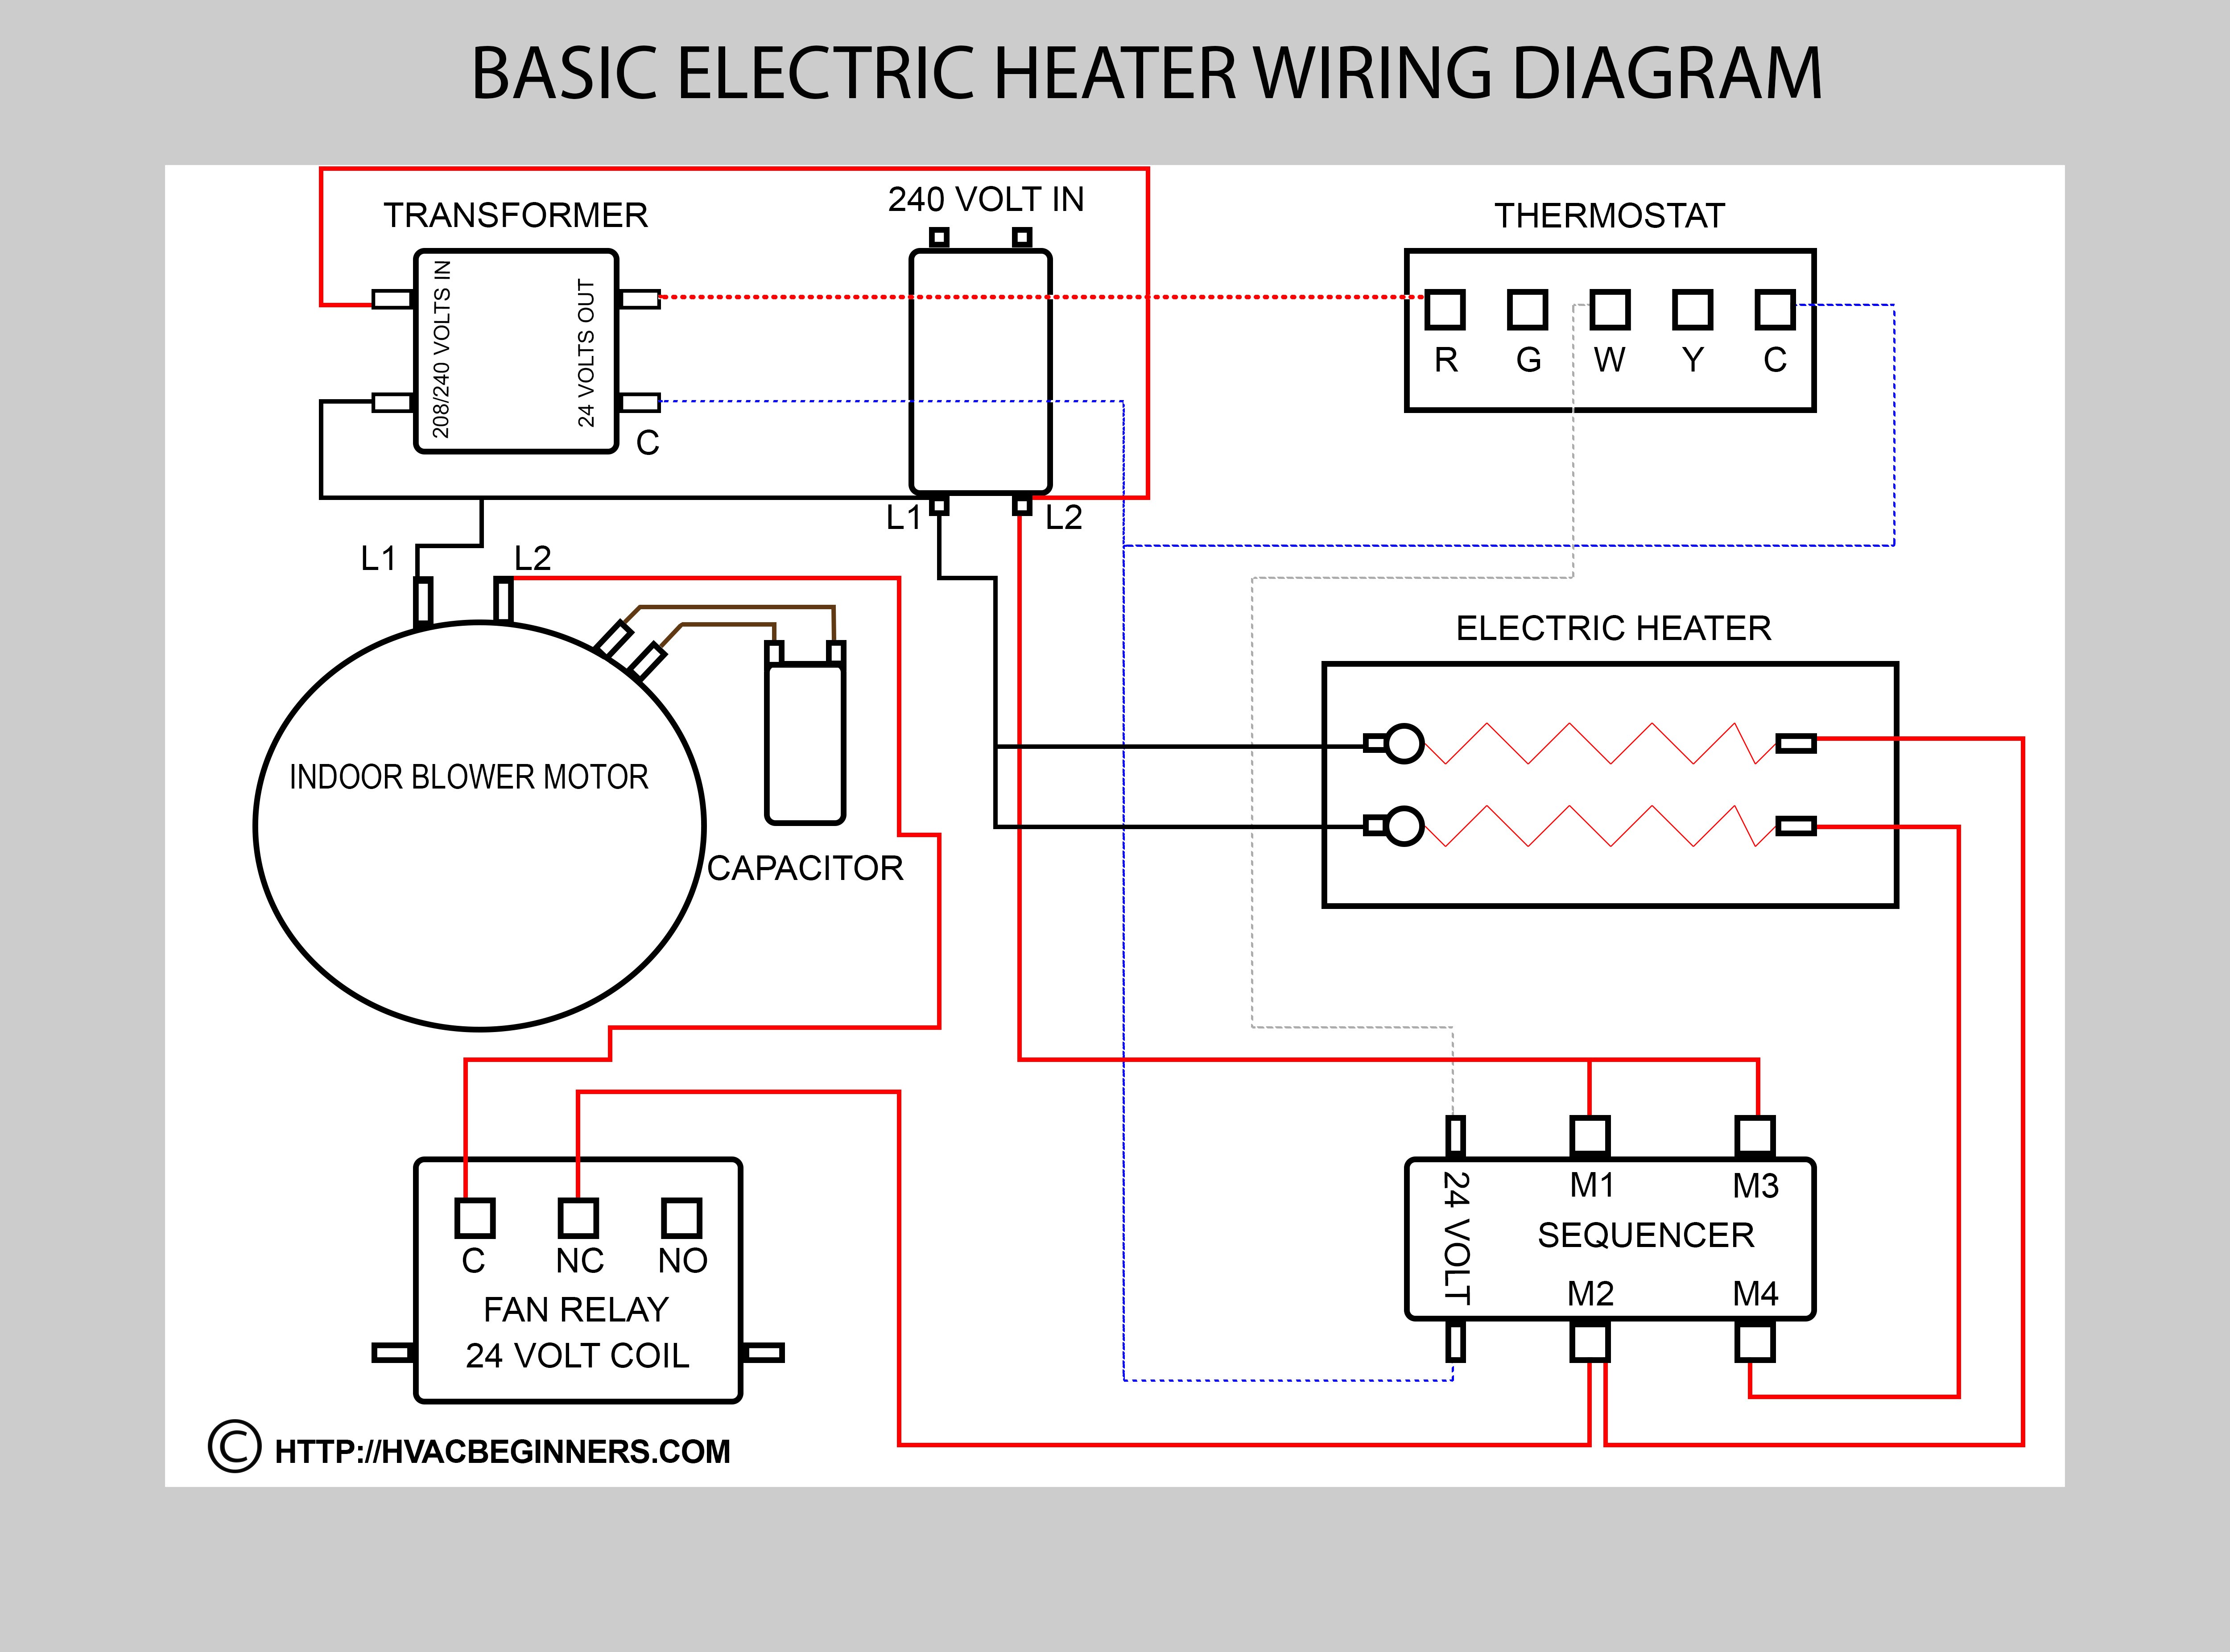 Wiring Diagram Electric Furnace Wire Muffle 5 Thermostat Cool Diagrams